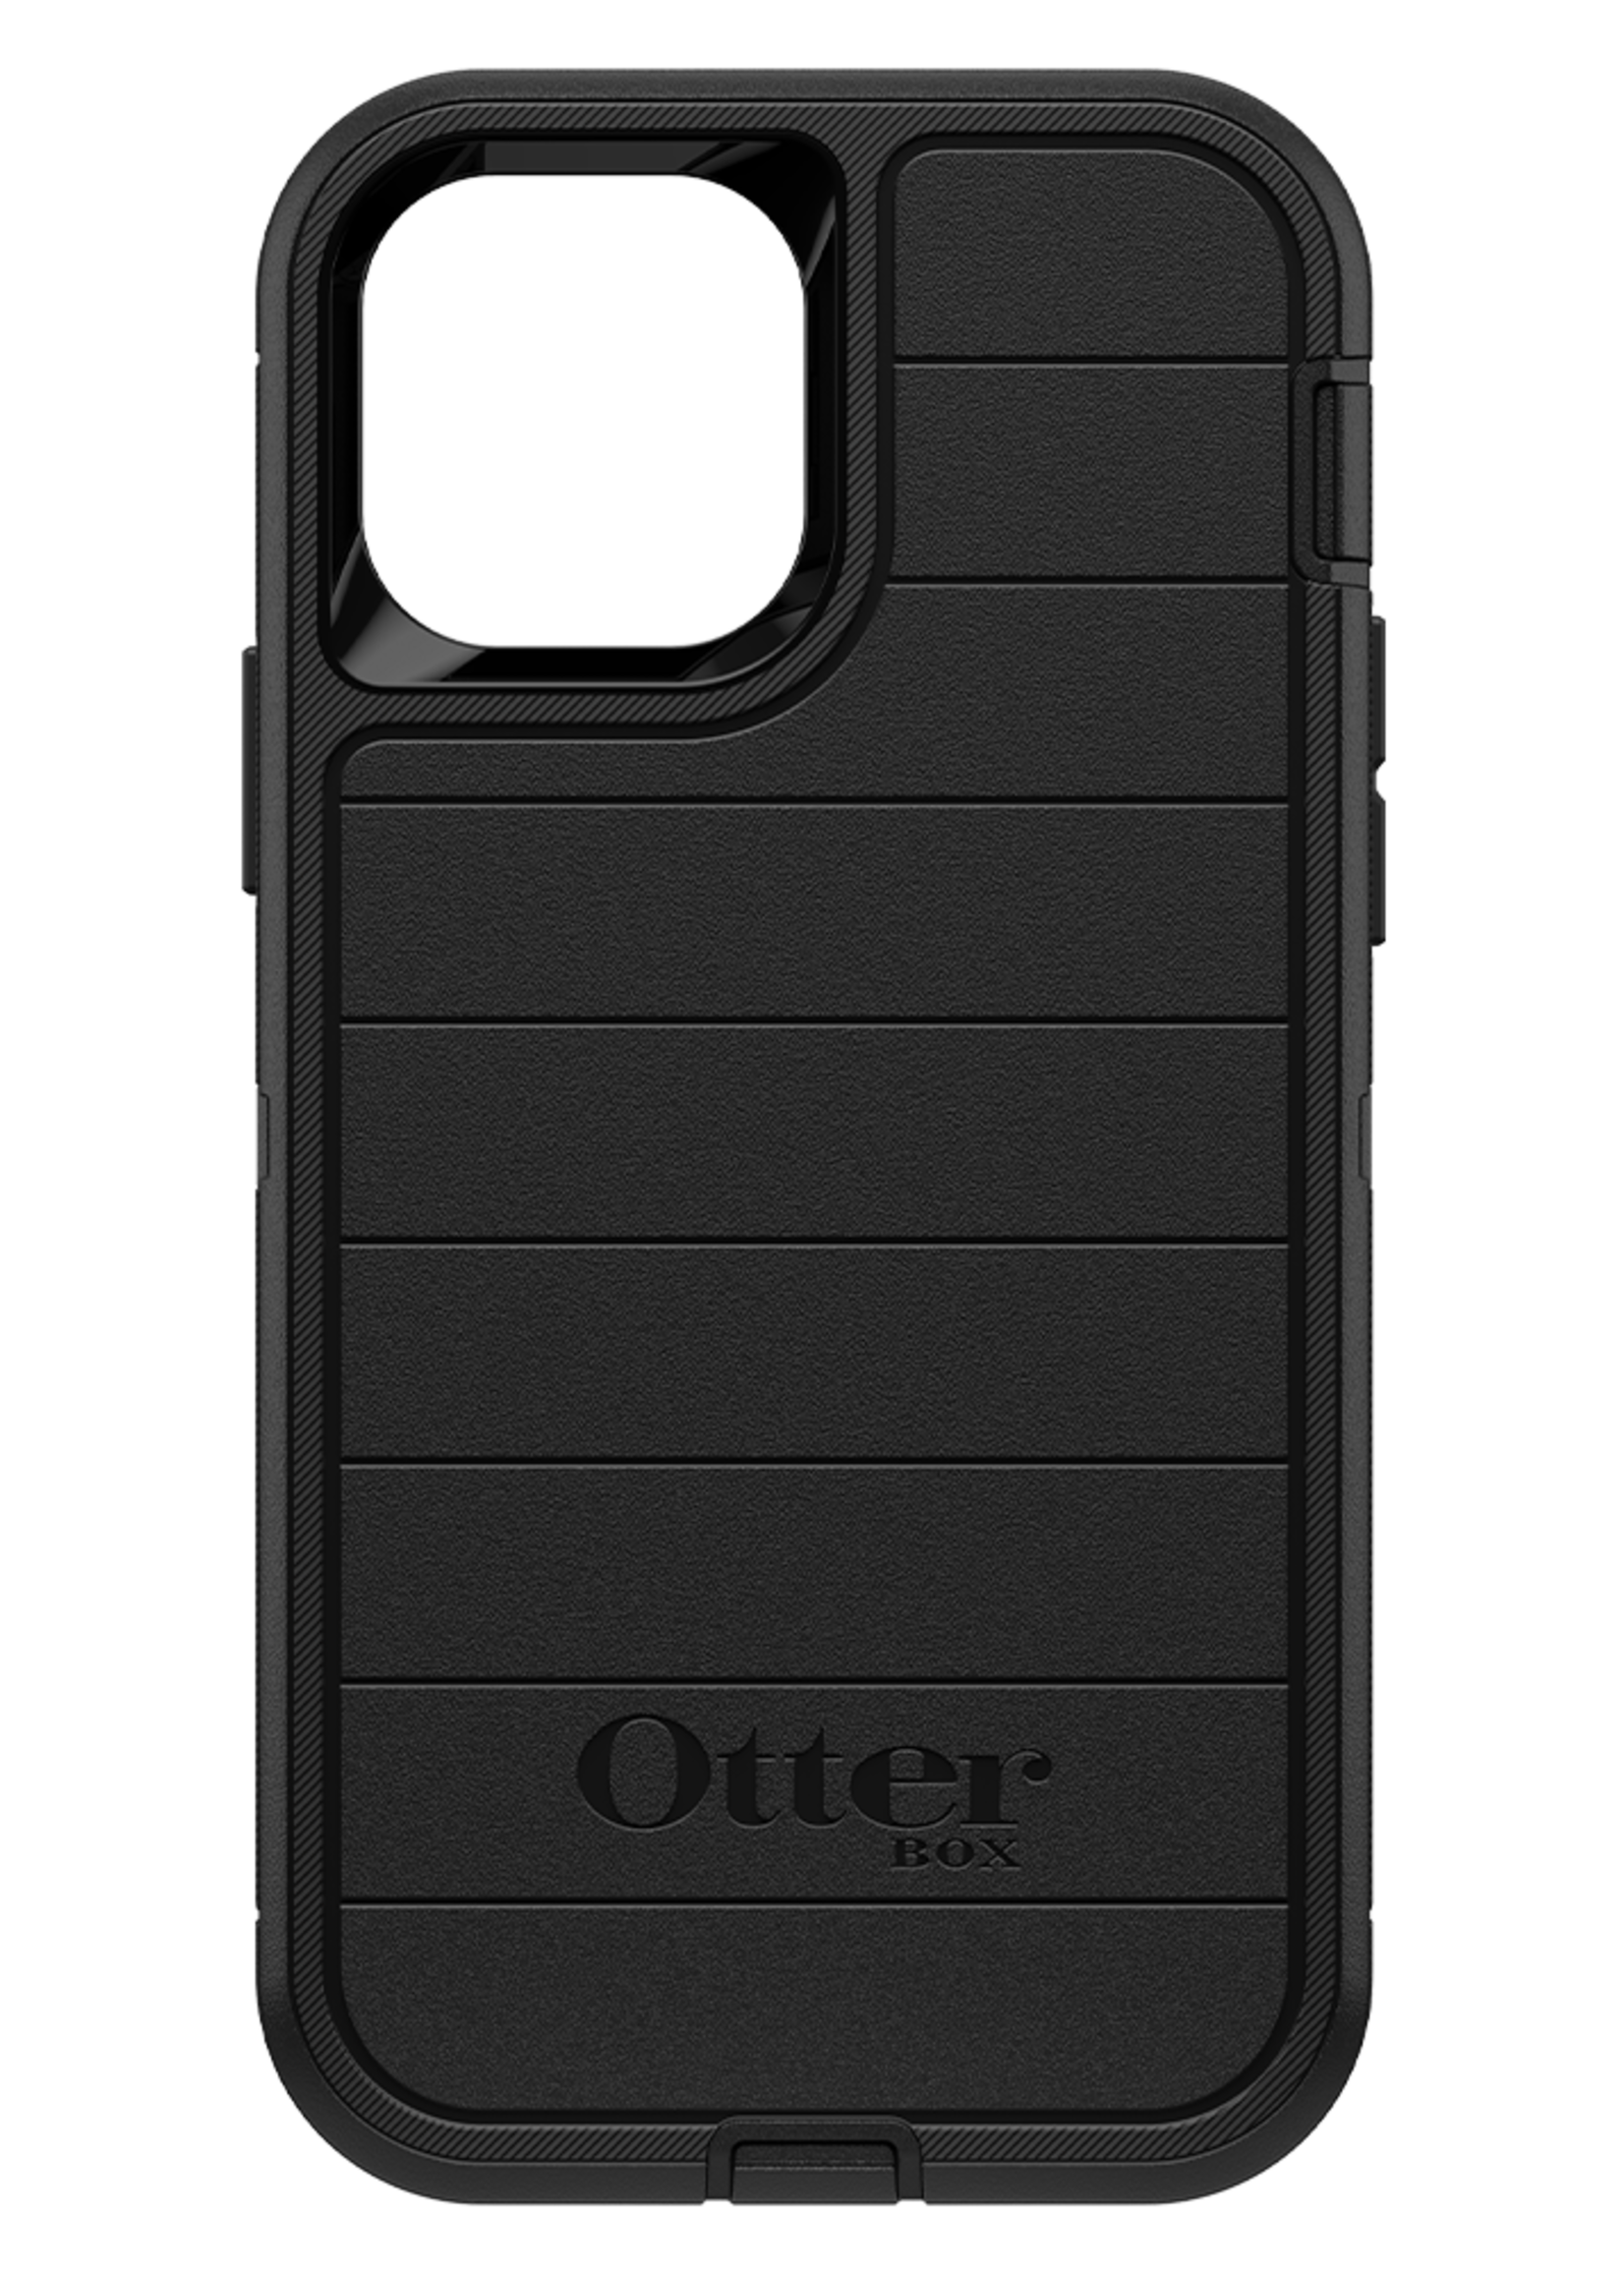 Otterbox OtterBox - Defender Pro Case for Apple iPhone 12 / 12 Pro - Black